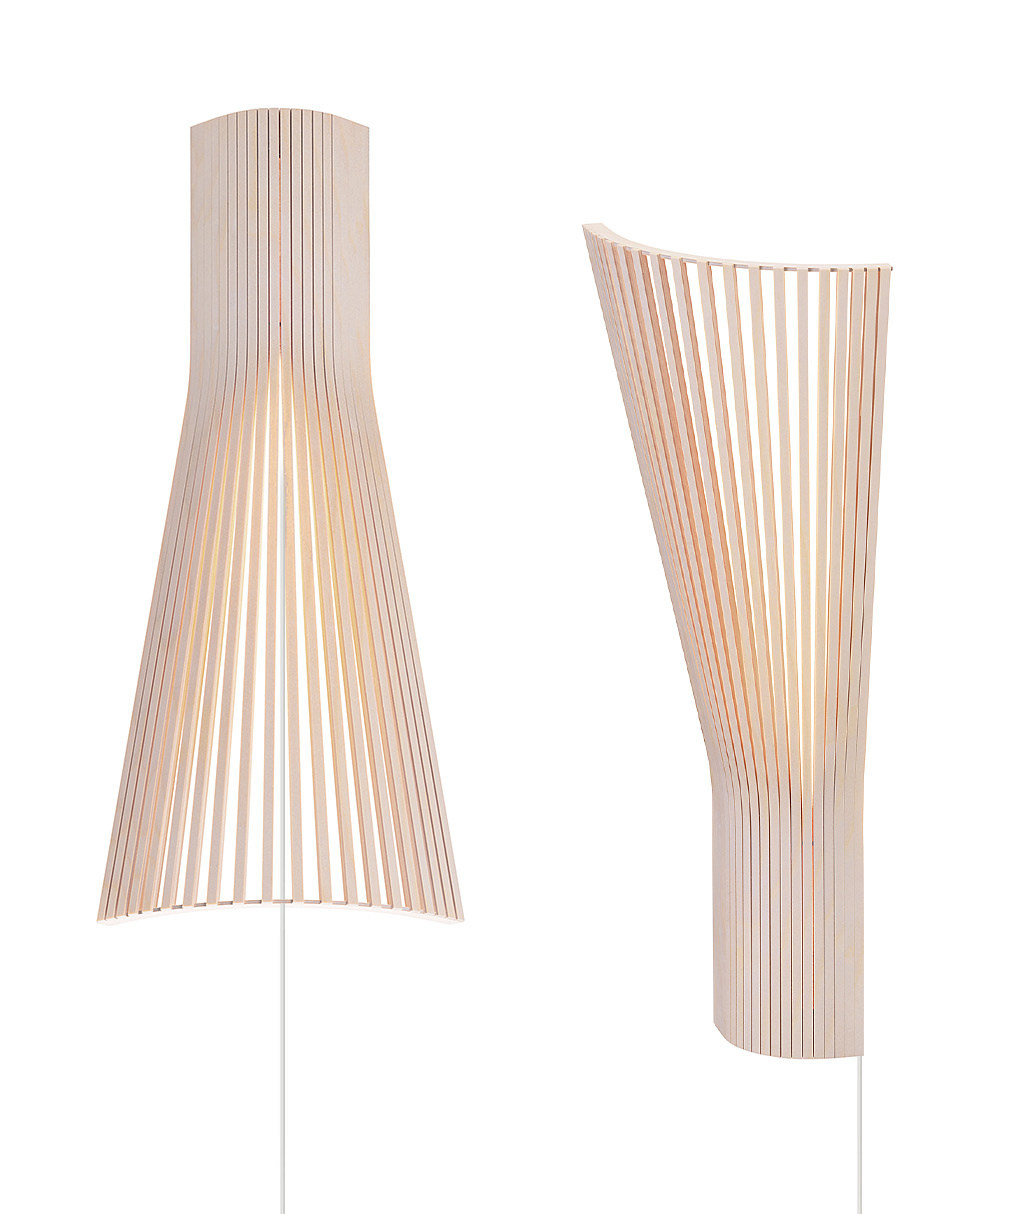 Secto 4236 corner lamp is available in natural birch